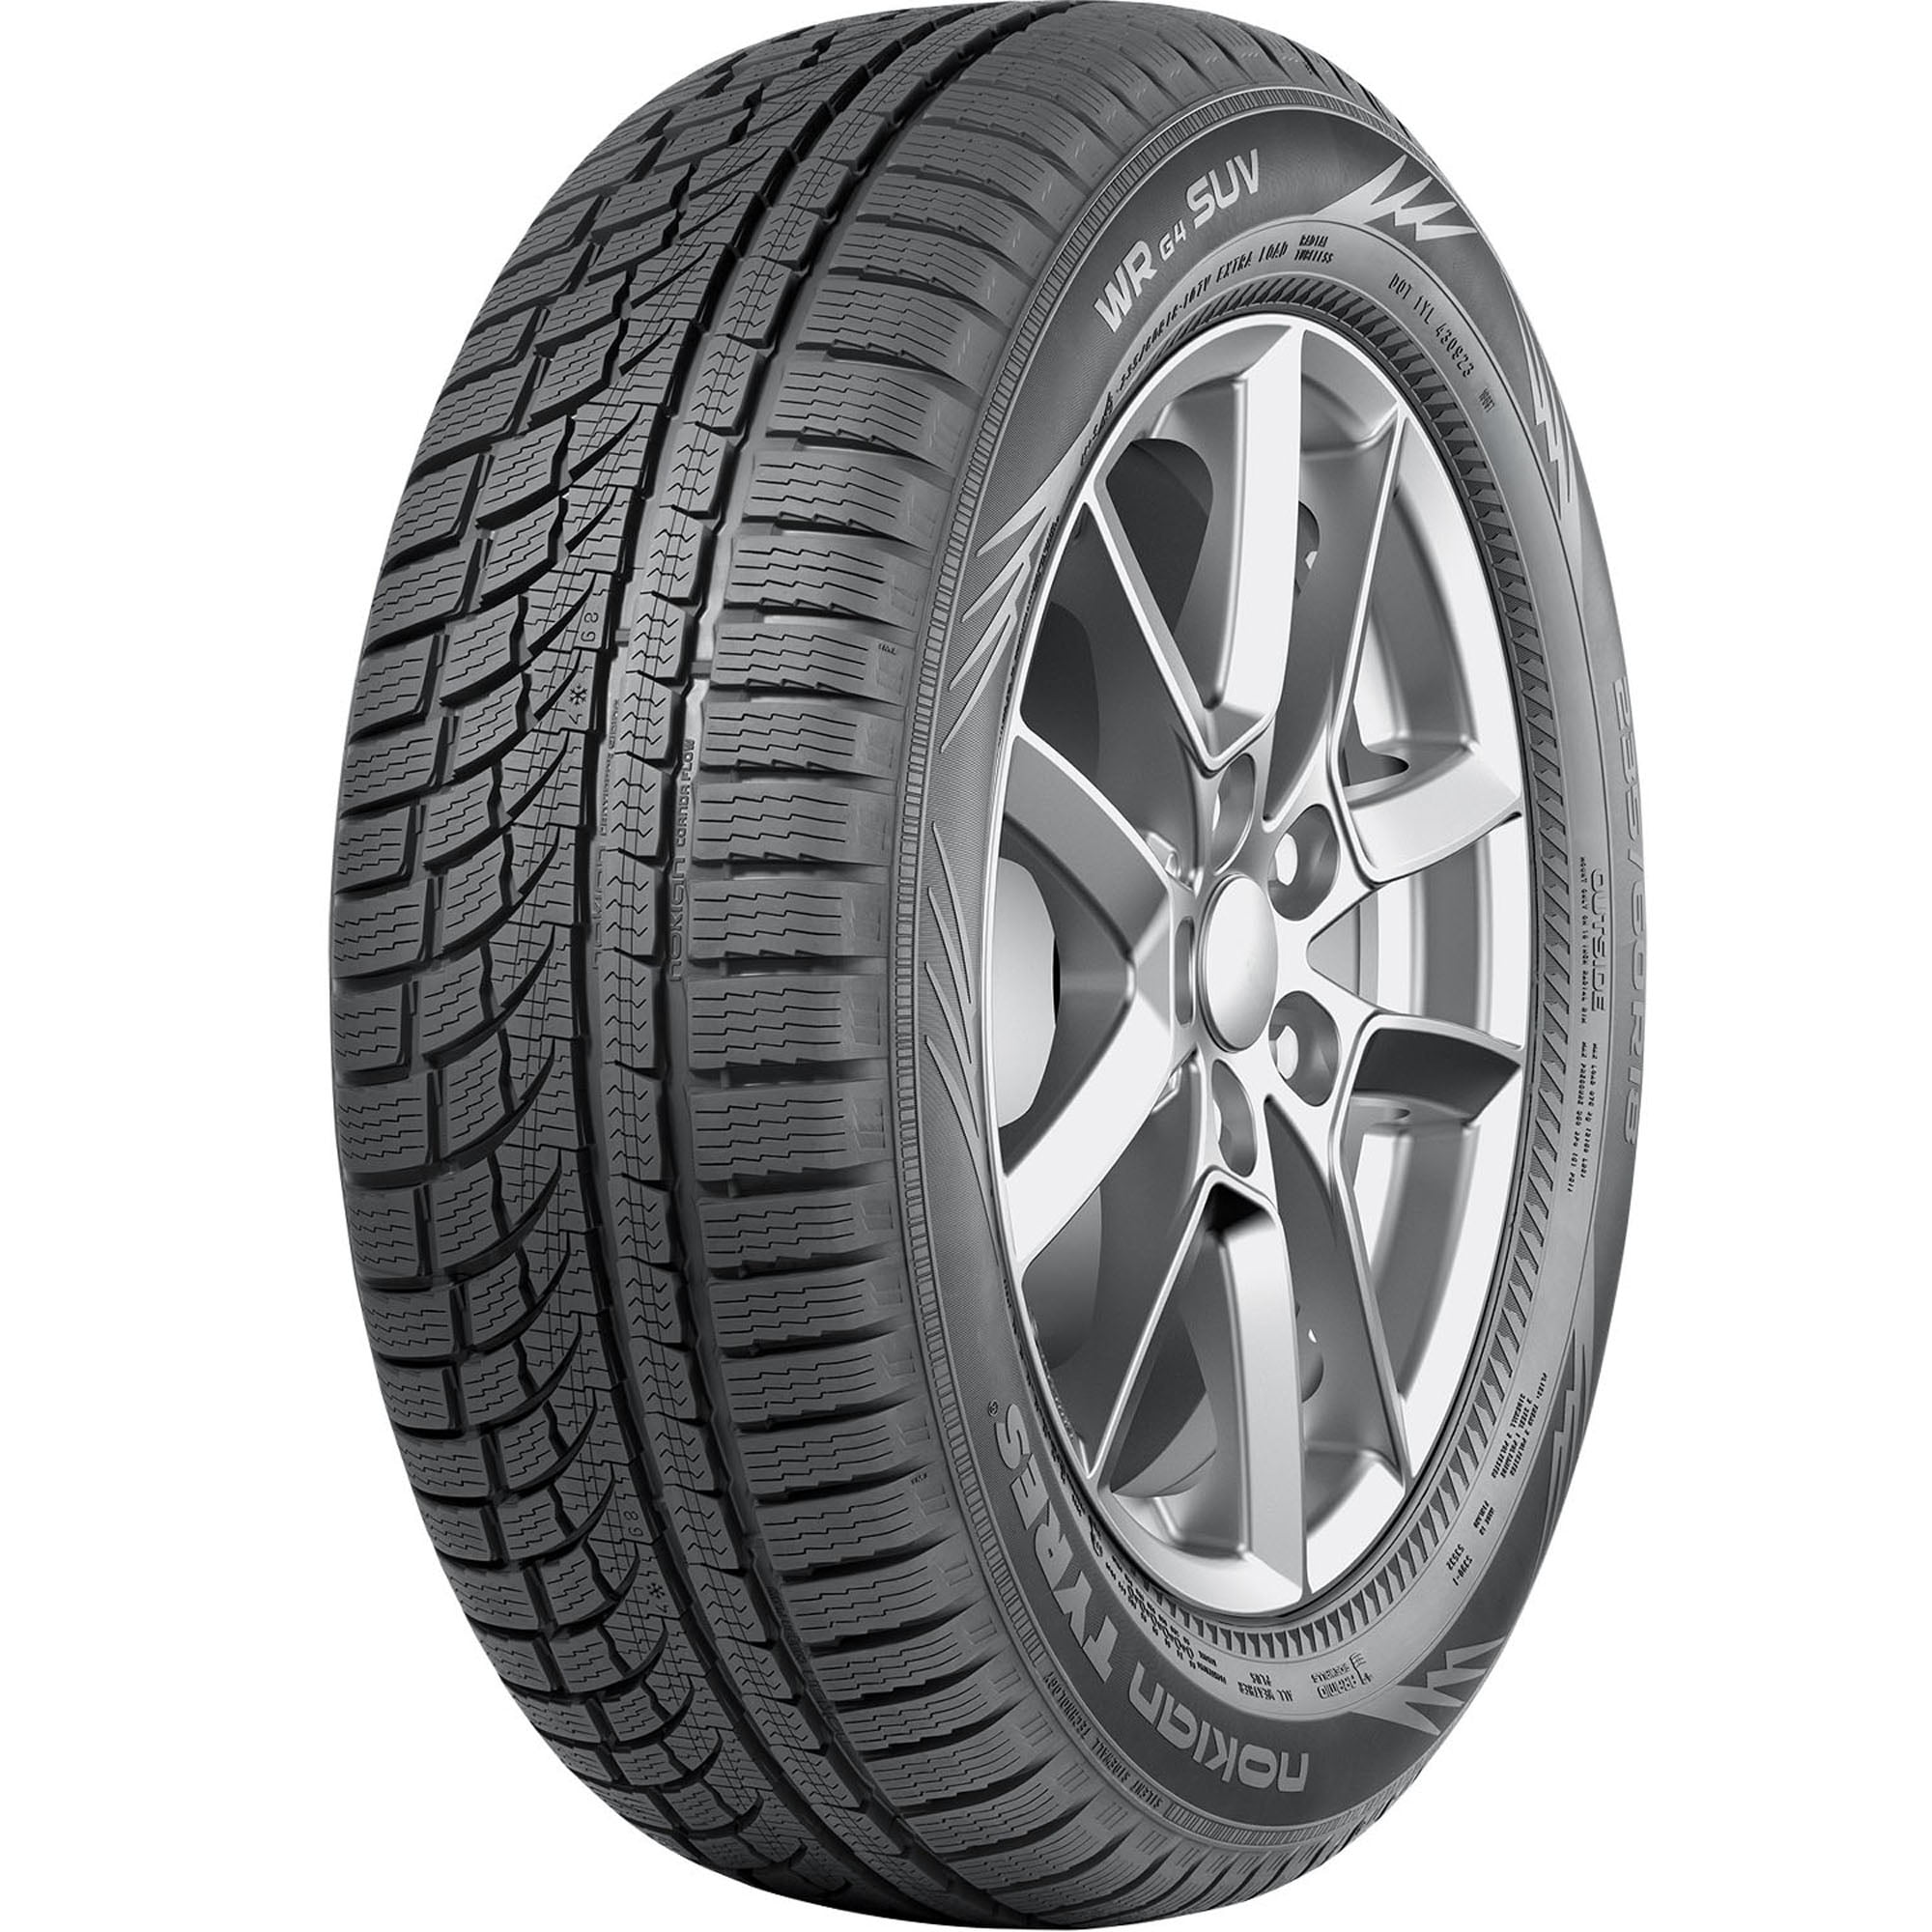 Nokian WR G4 SUV All Weather 215/70R16 100H SUV/Crossover Tire